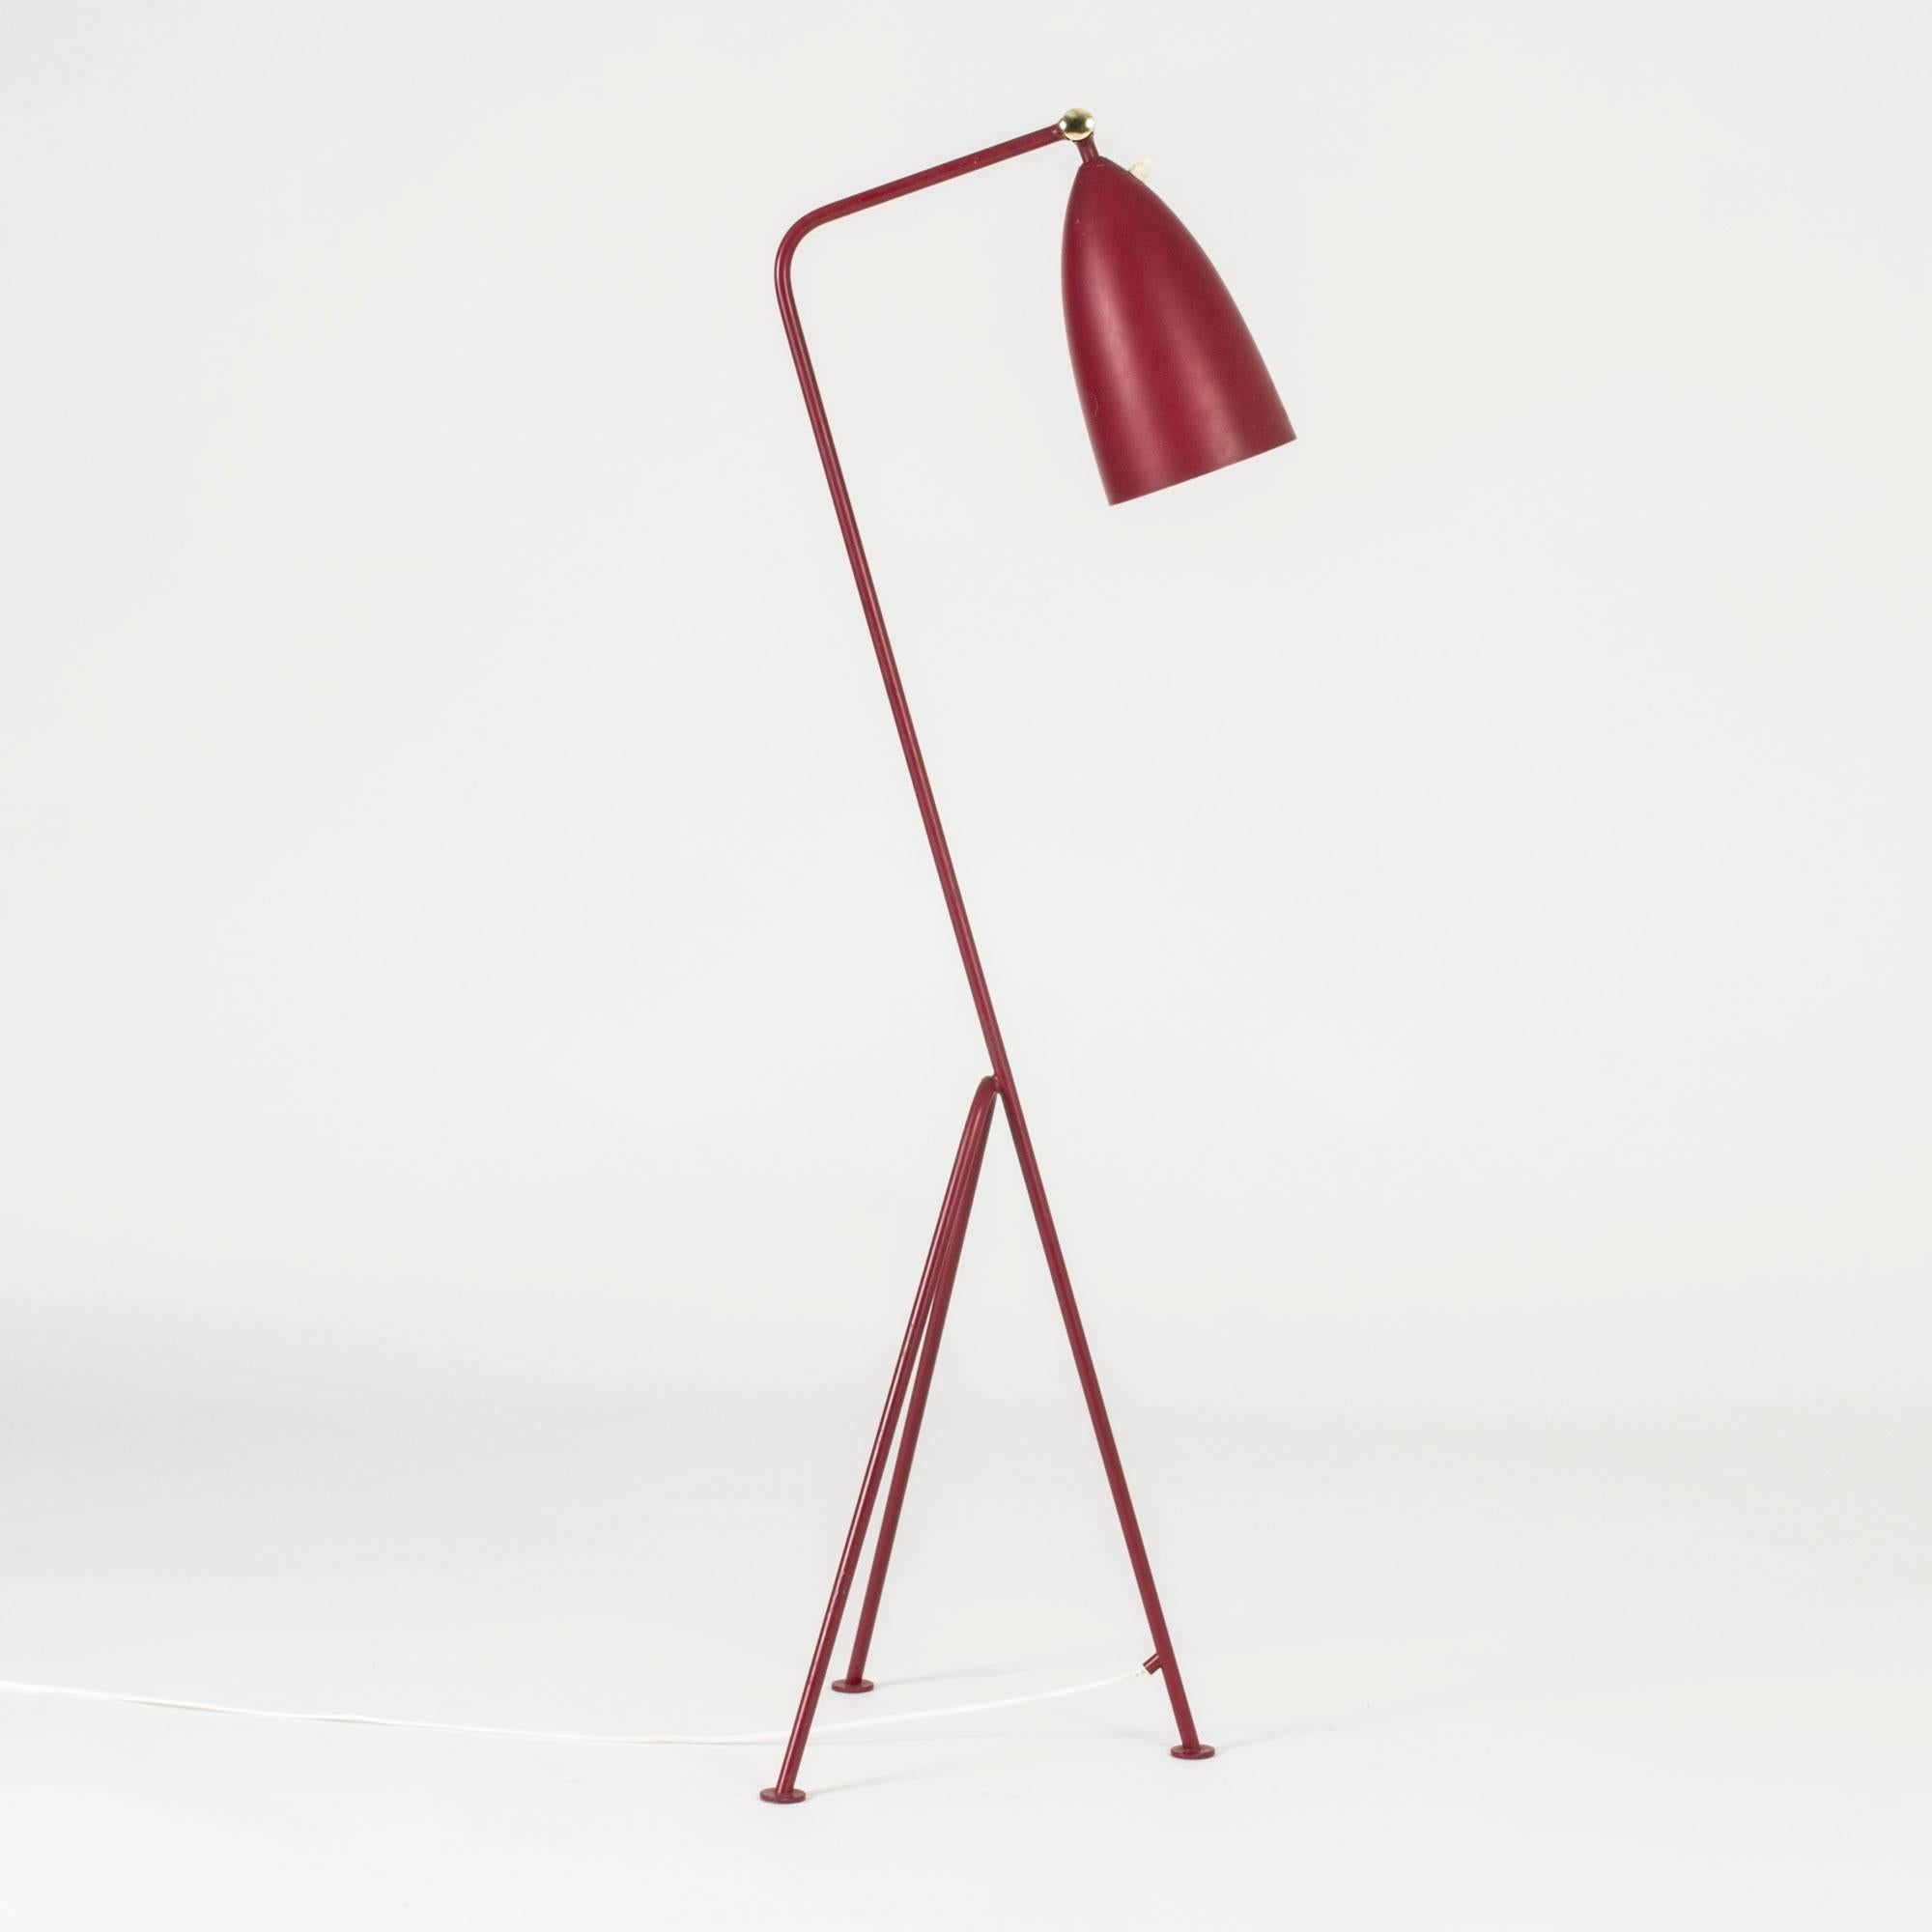 Gorgeous raspberry red “Grasshopper” floor lamp by Greta Magnusson-Grossman. Made from lacquered metal with amazing lines and proportions.